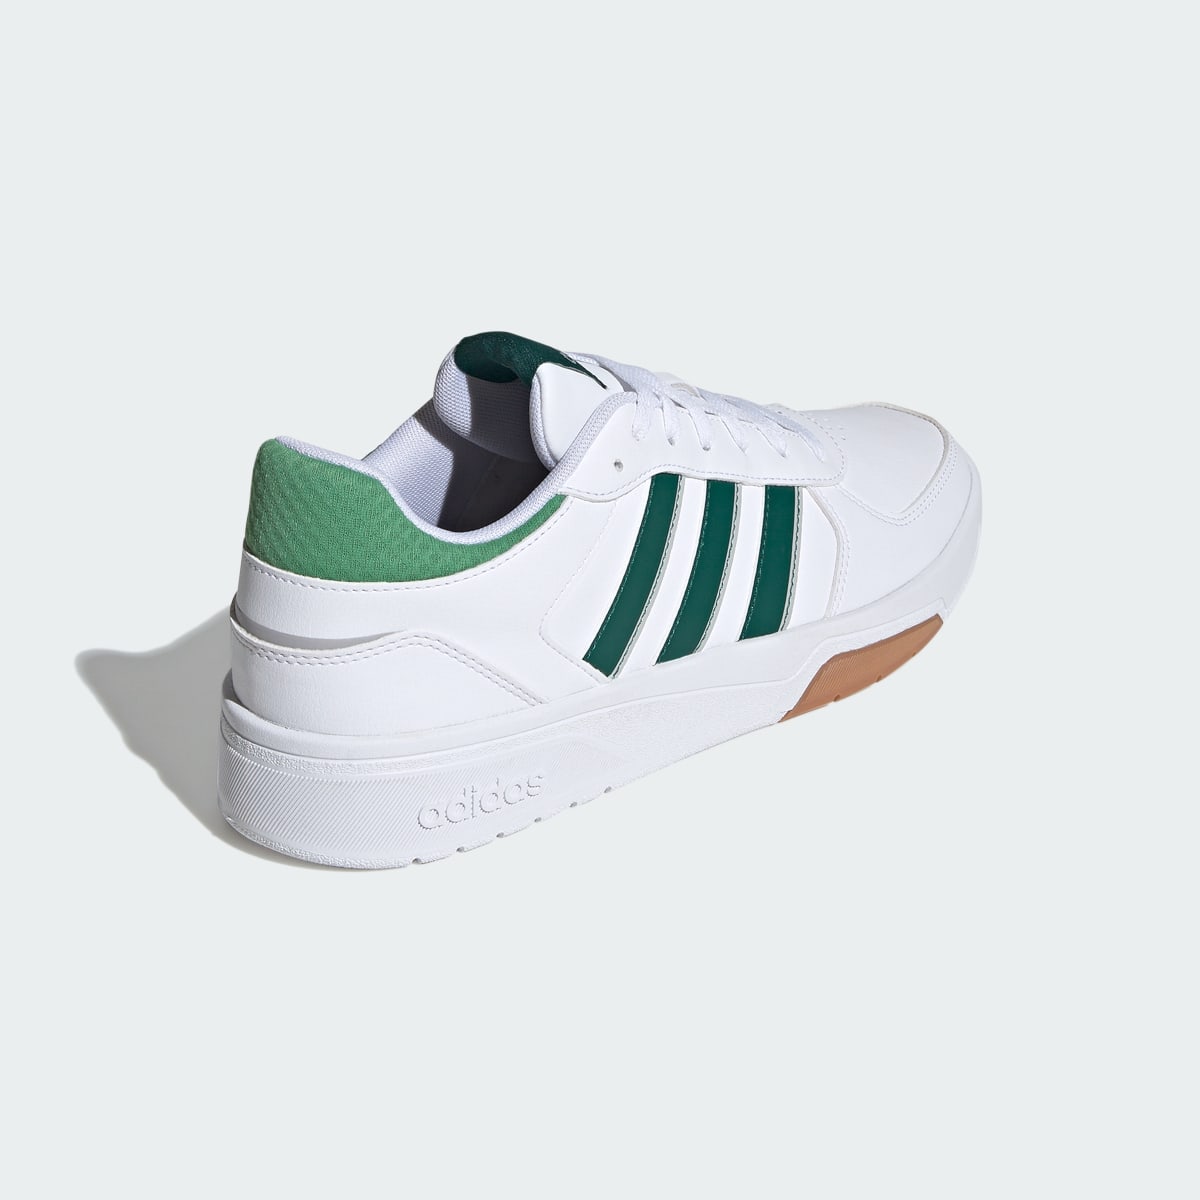 Adidas Chaussure CourtBeat Court Lifestyle. 6